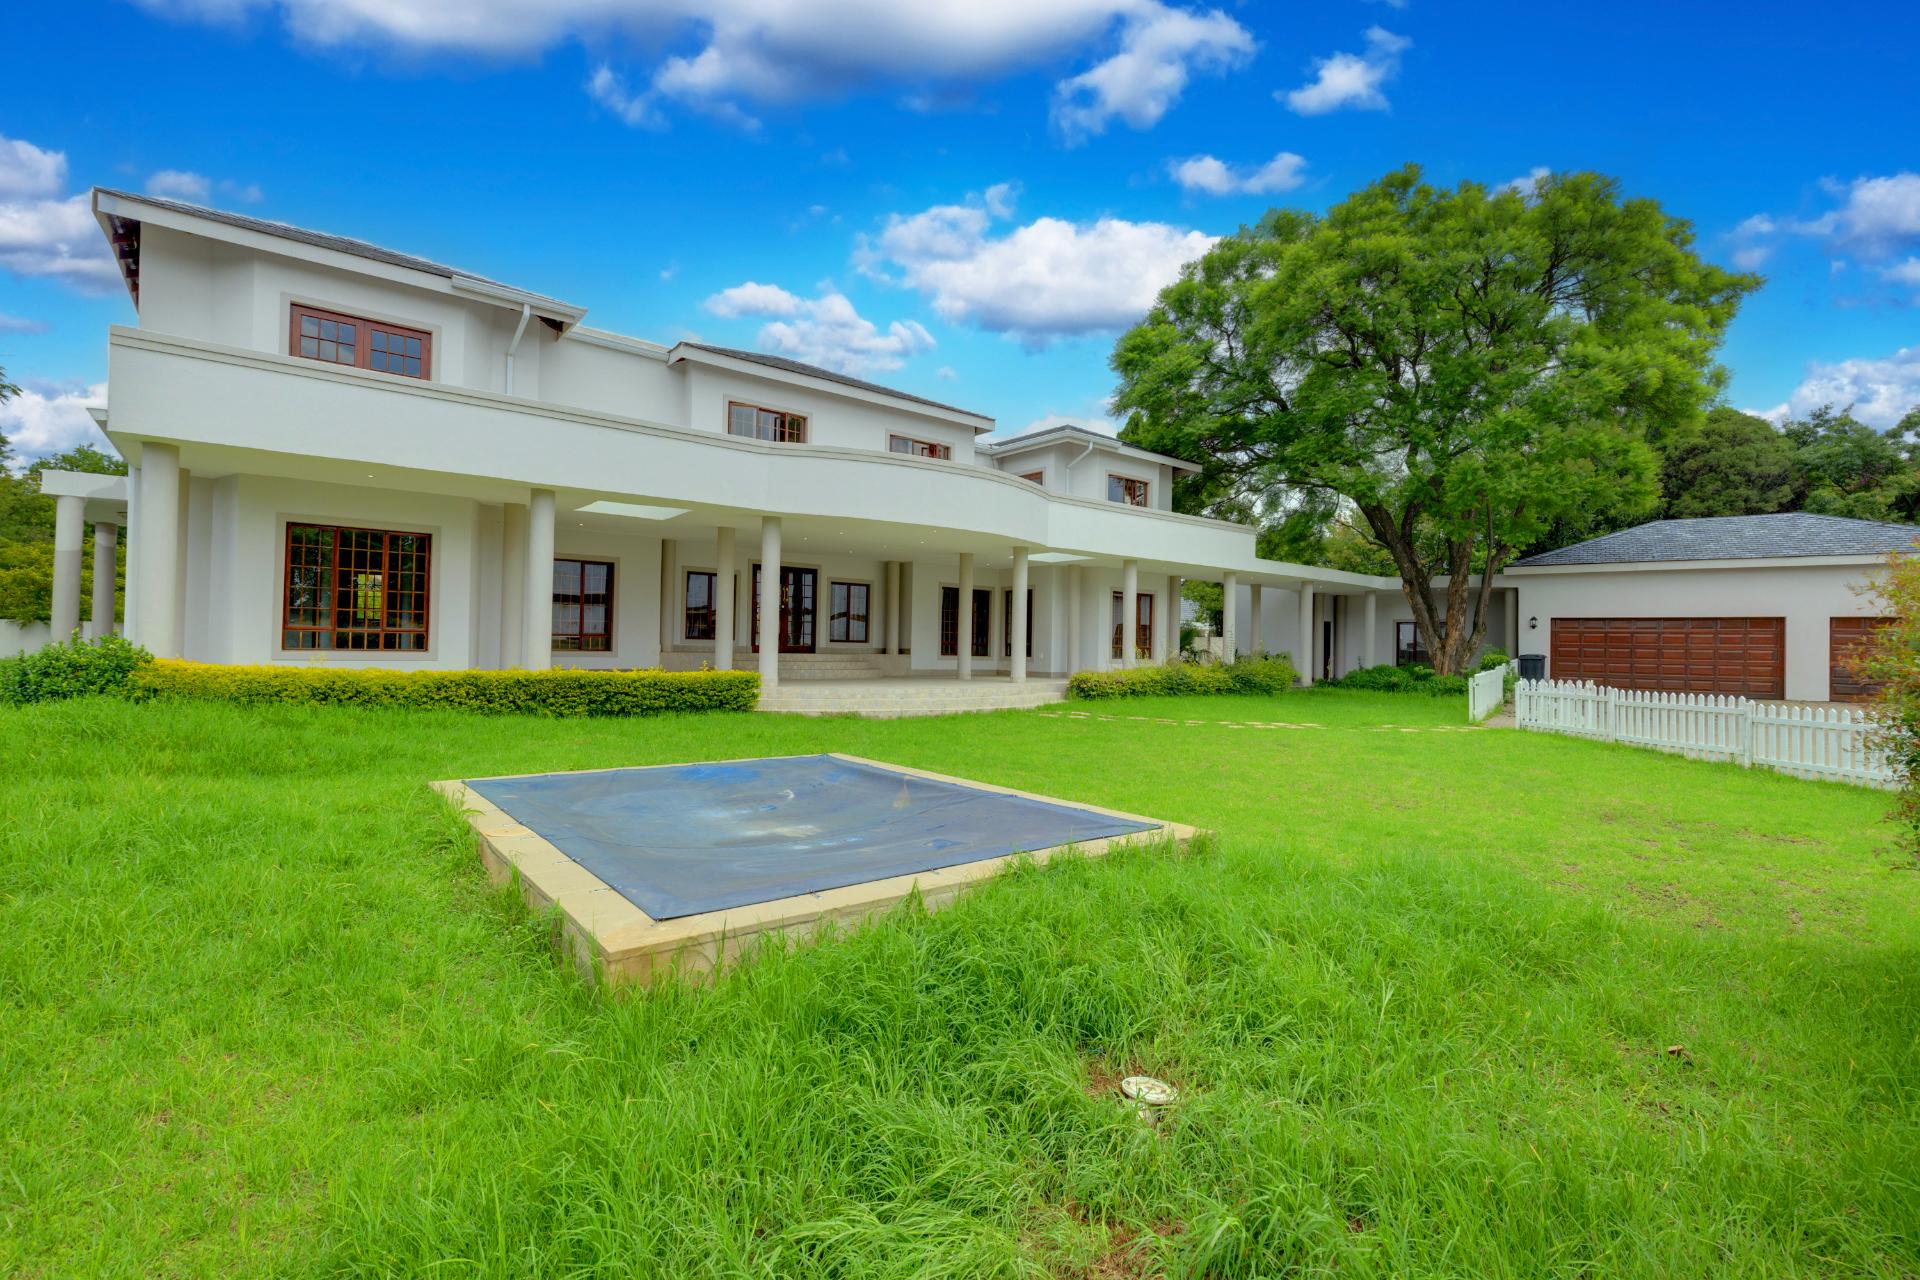 Spacious & Luxurious 5 Bedroom Family House For Rent in Bryanston 